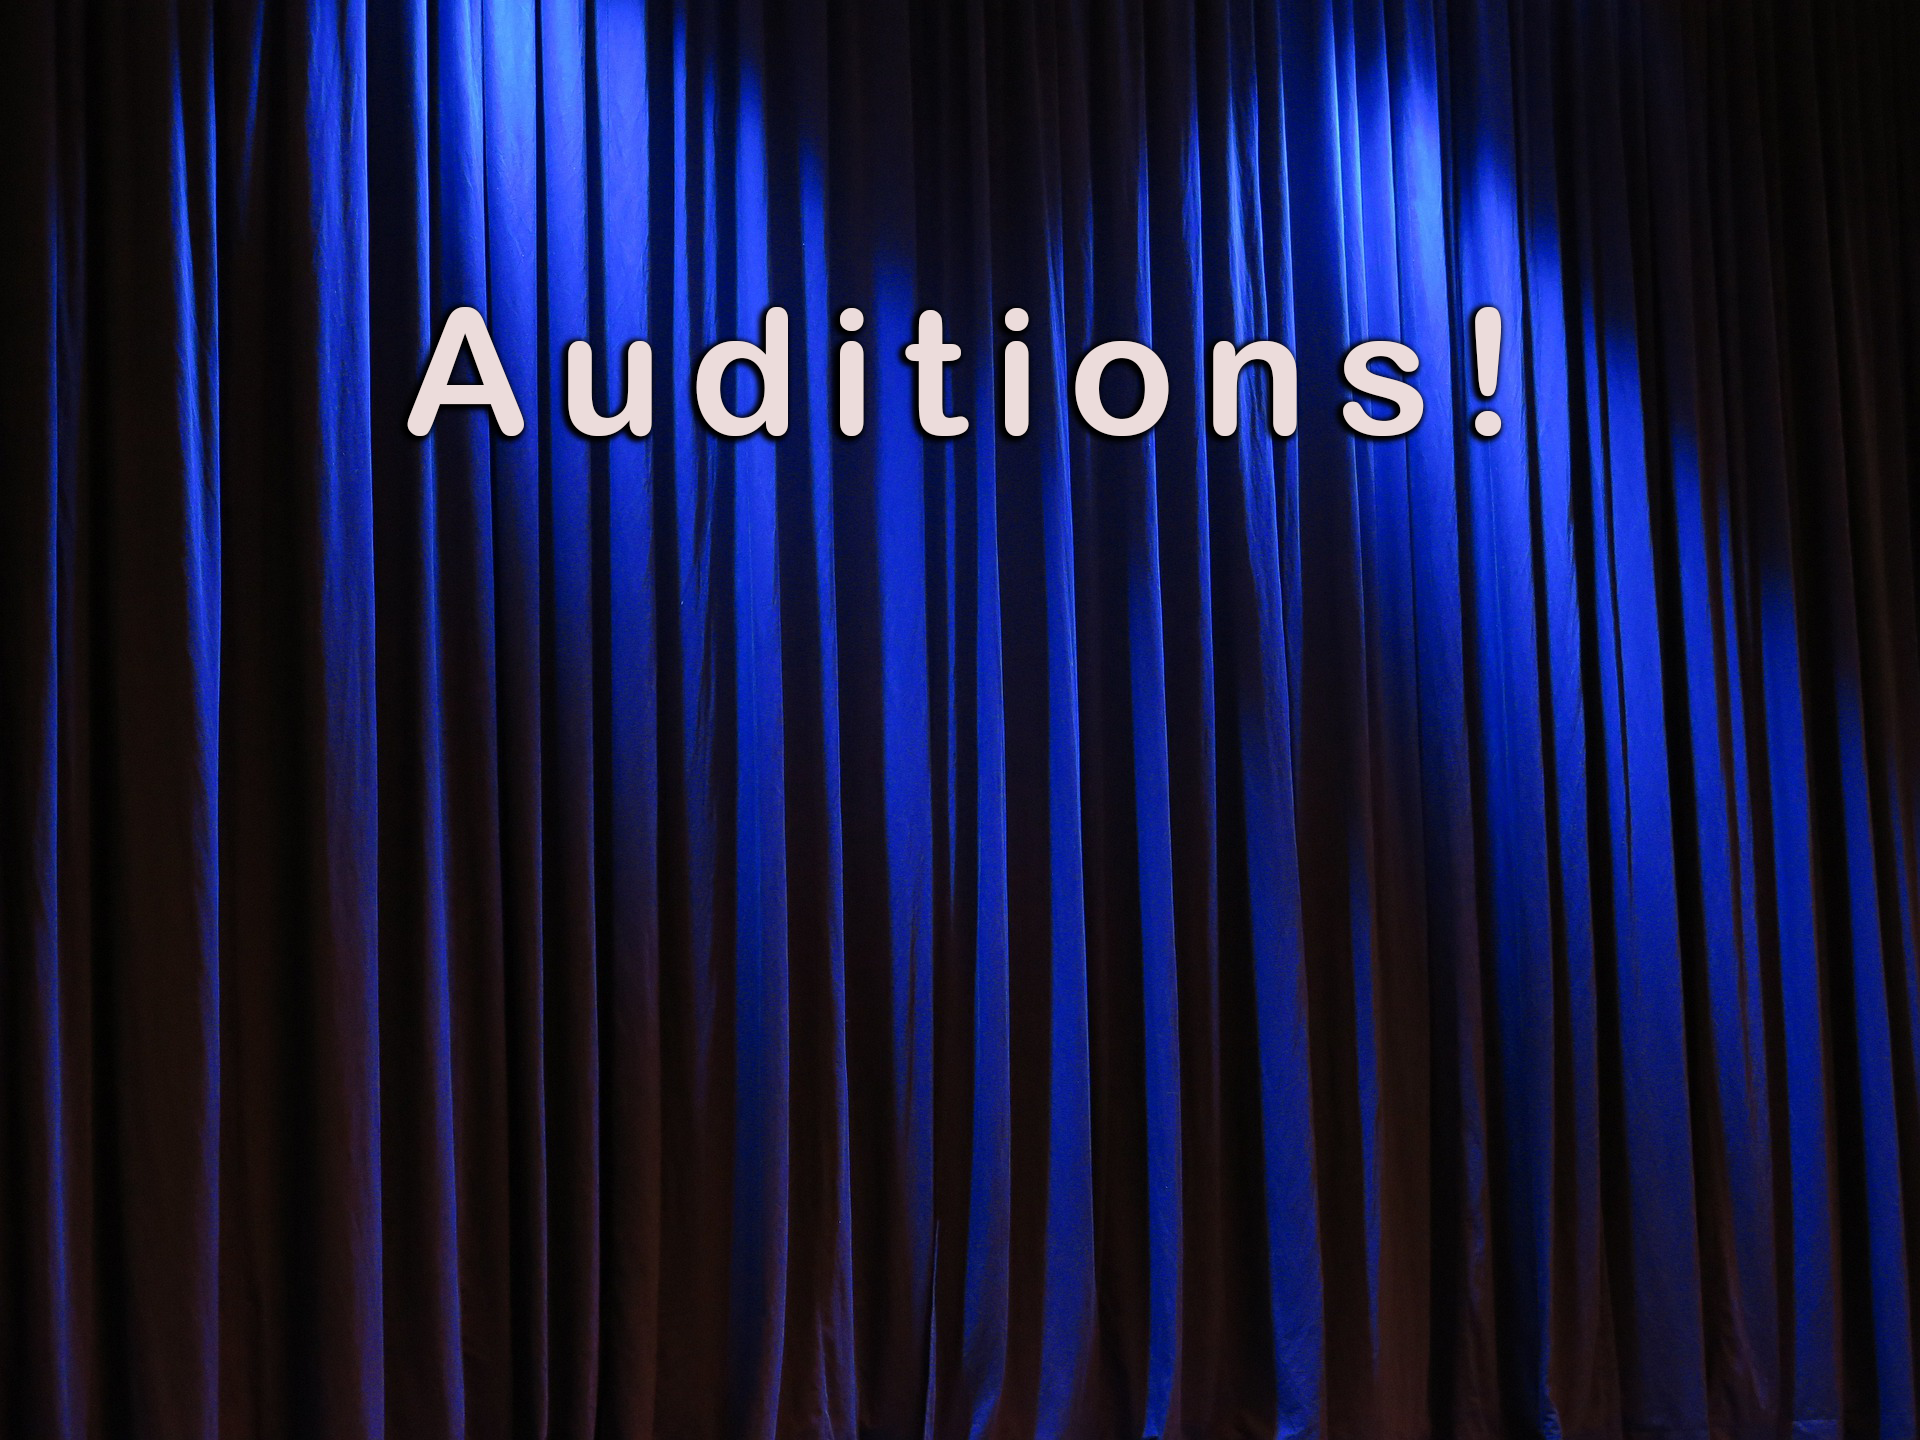 Auditions! Graphic